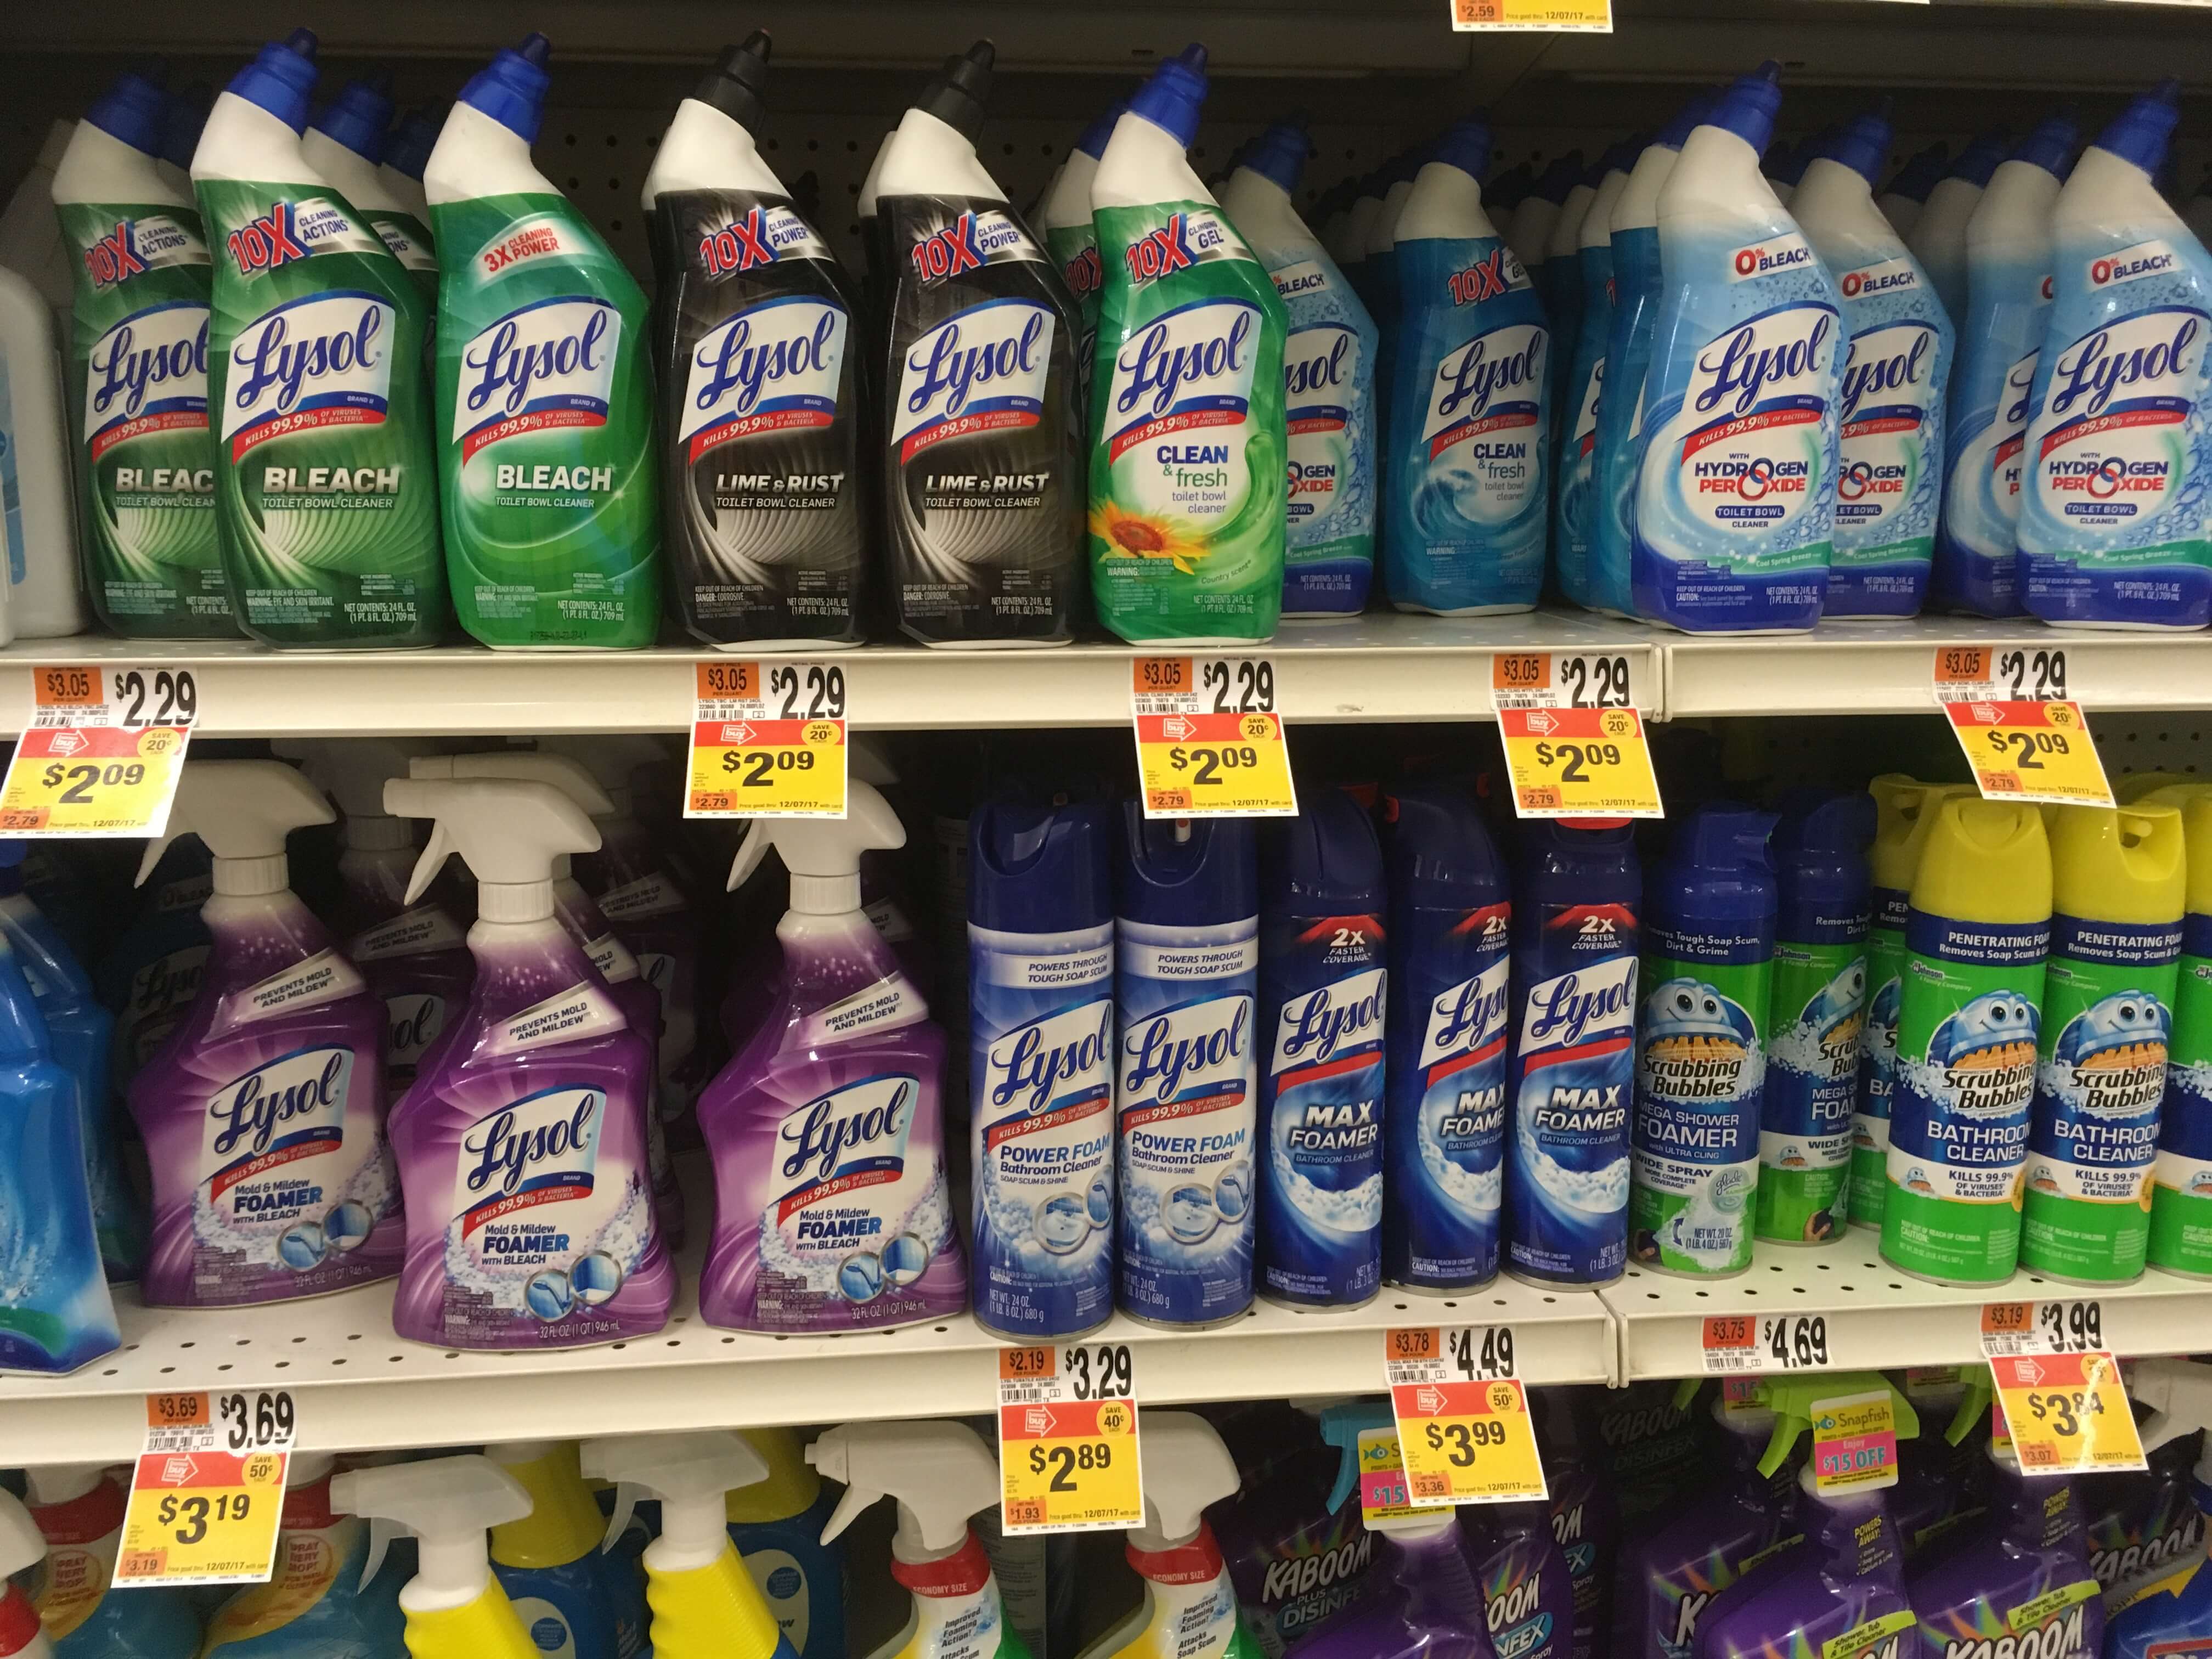 Lysol Toilet Cleaner & Wipes ly $0 49 at Stop & Shop Giant and